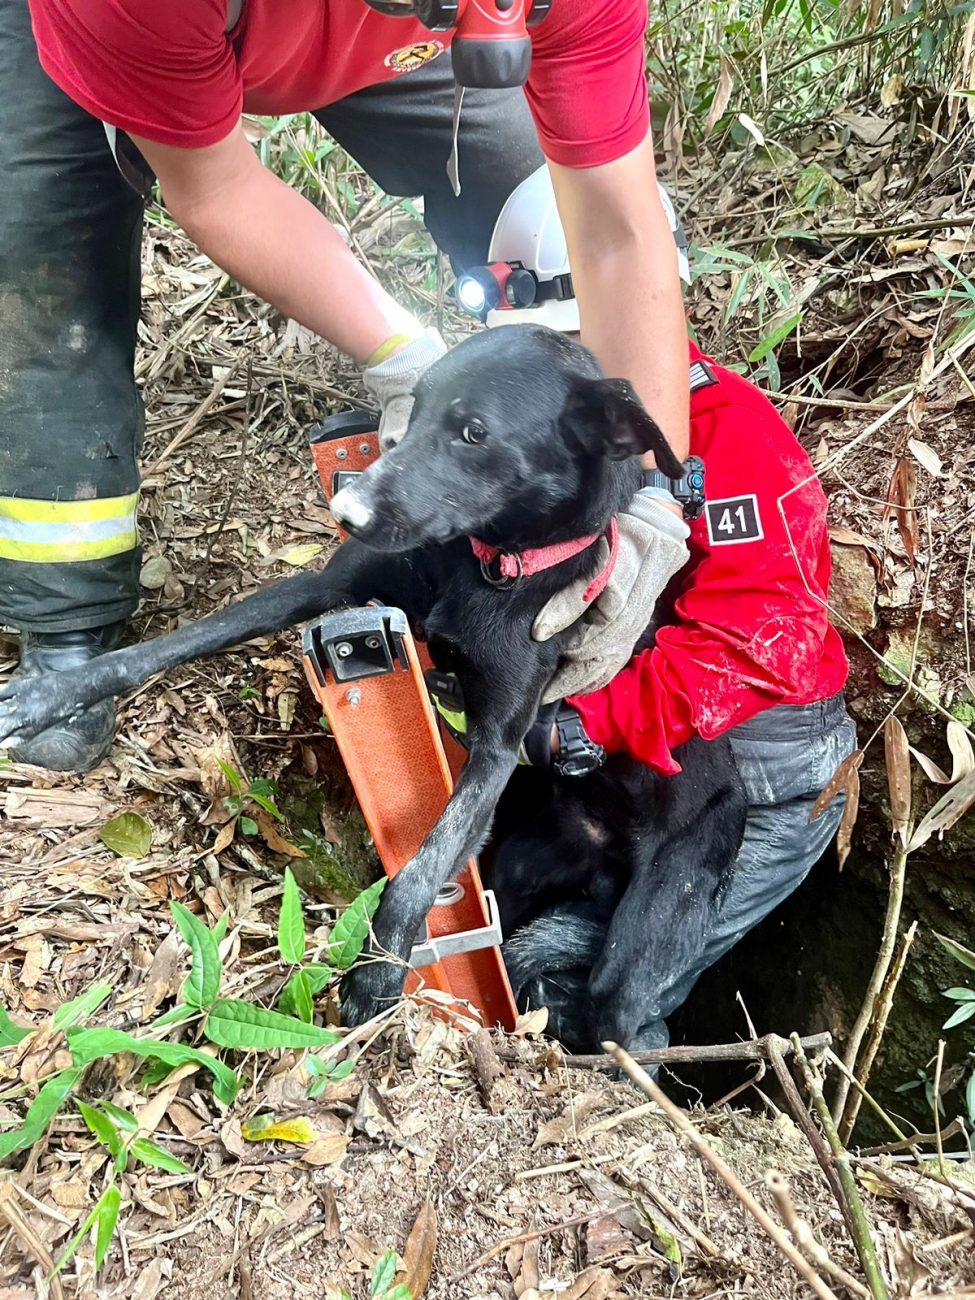 Dog missing for days found in 4m deep pit in Treze de Mayo - BVJ/Disclosure/ND